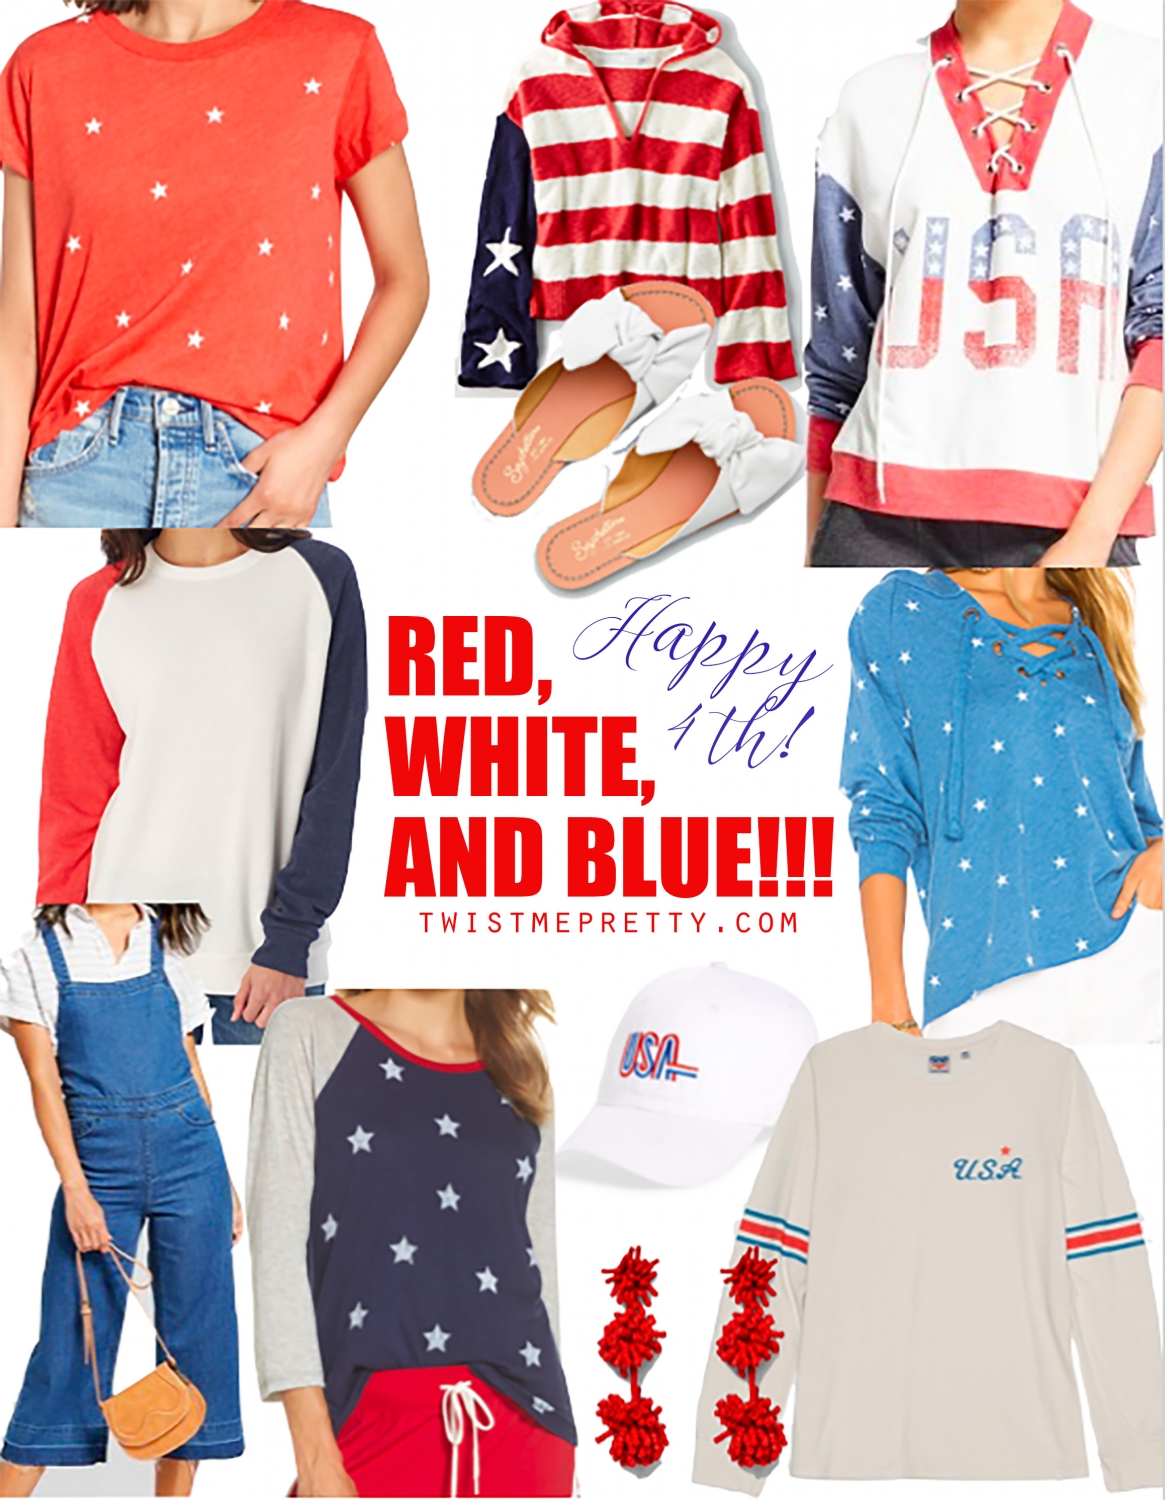 https://www.twistmepretty.com/wp-content/uploads/2018/06/red-white-and-blue-.jpg